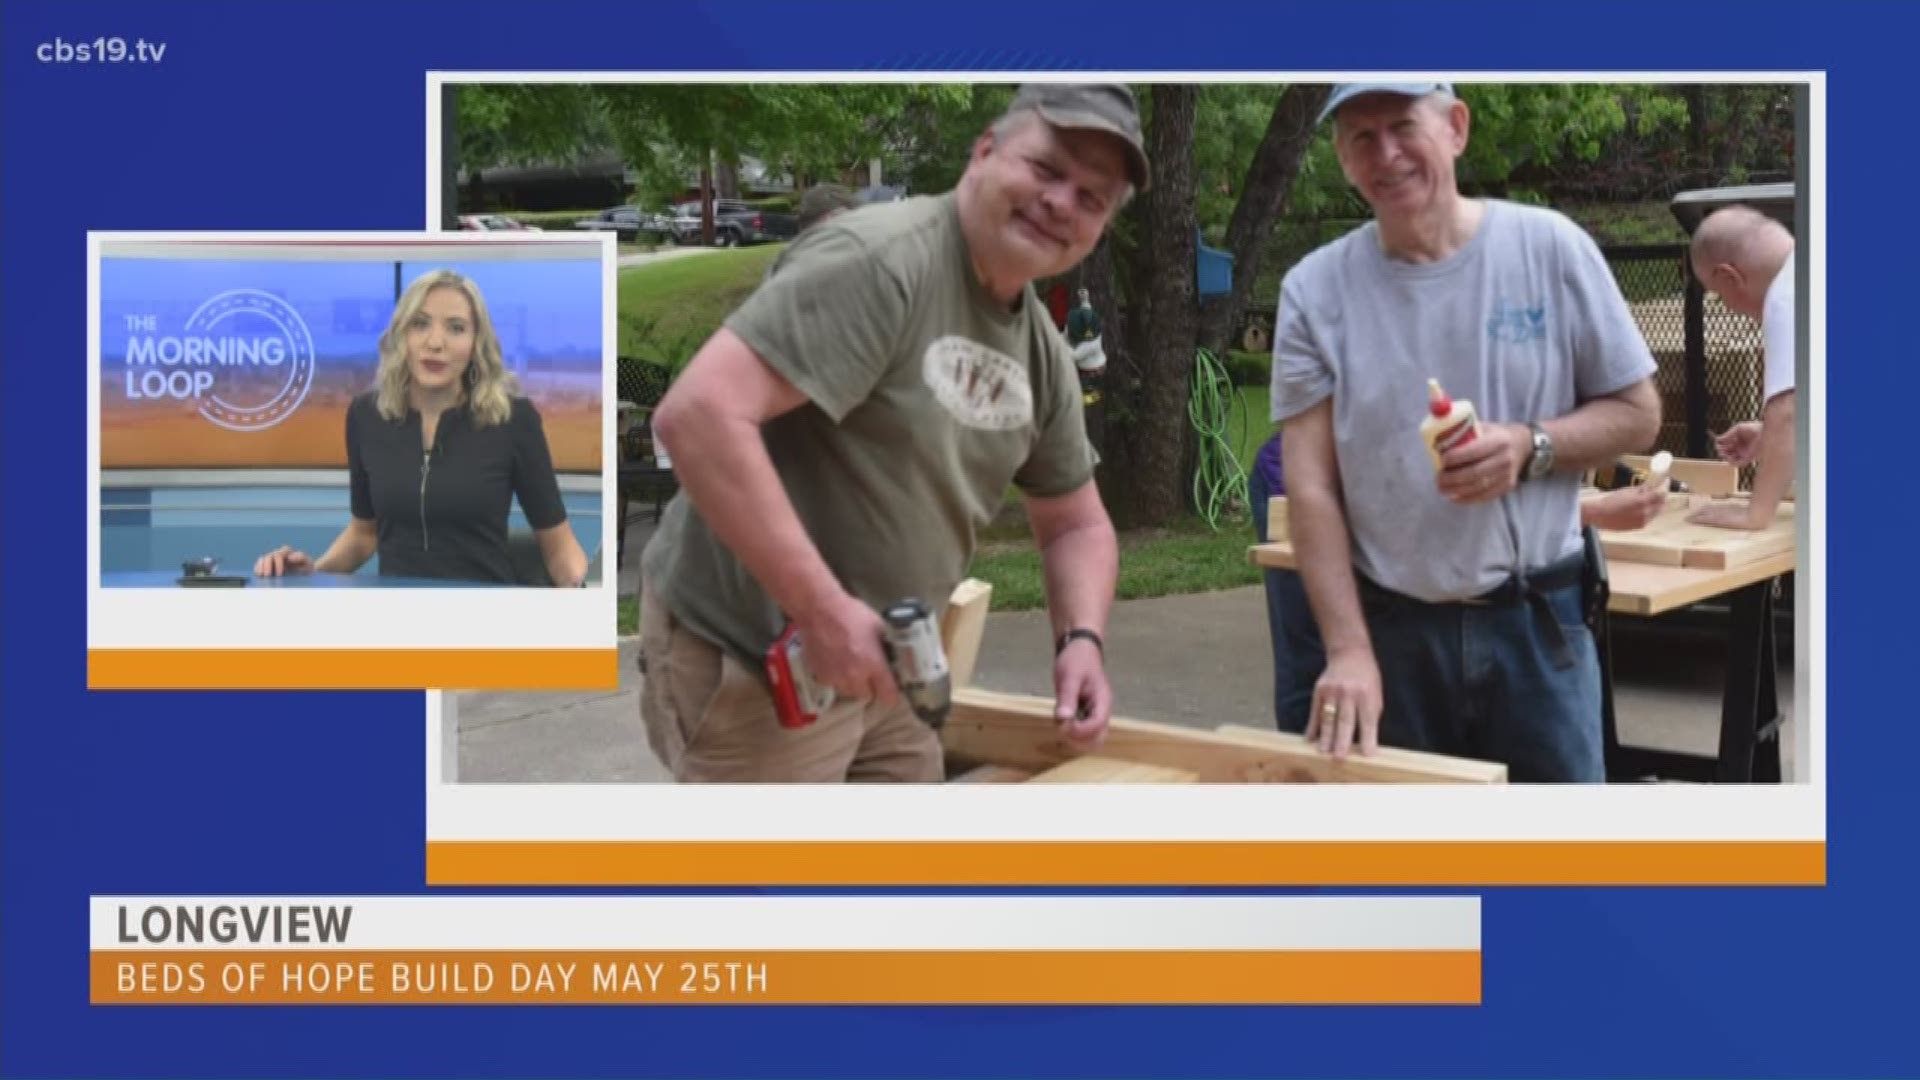 Many of us have a four day weekend ahead, but for one group, they're planning on spending one of those mornings, building beds. 
Building and giving, that's the idea behind Beds of Hope in Longview. 
On this Saturday, May 25th, their goal is to build 50 beds for children who don't have one.